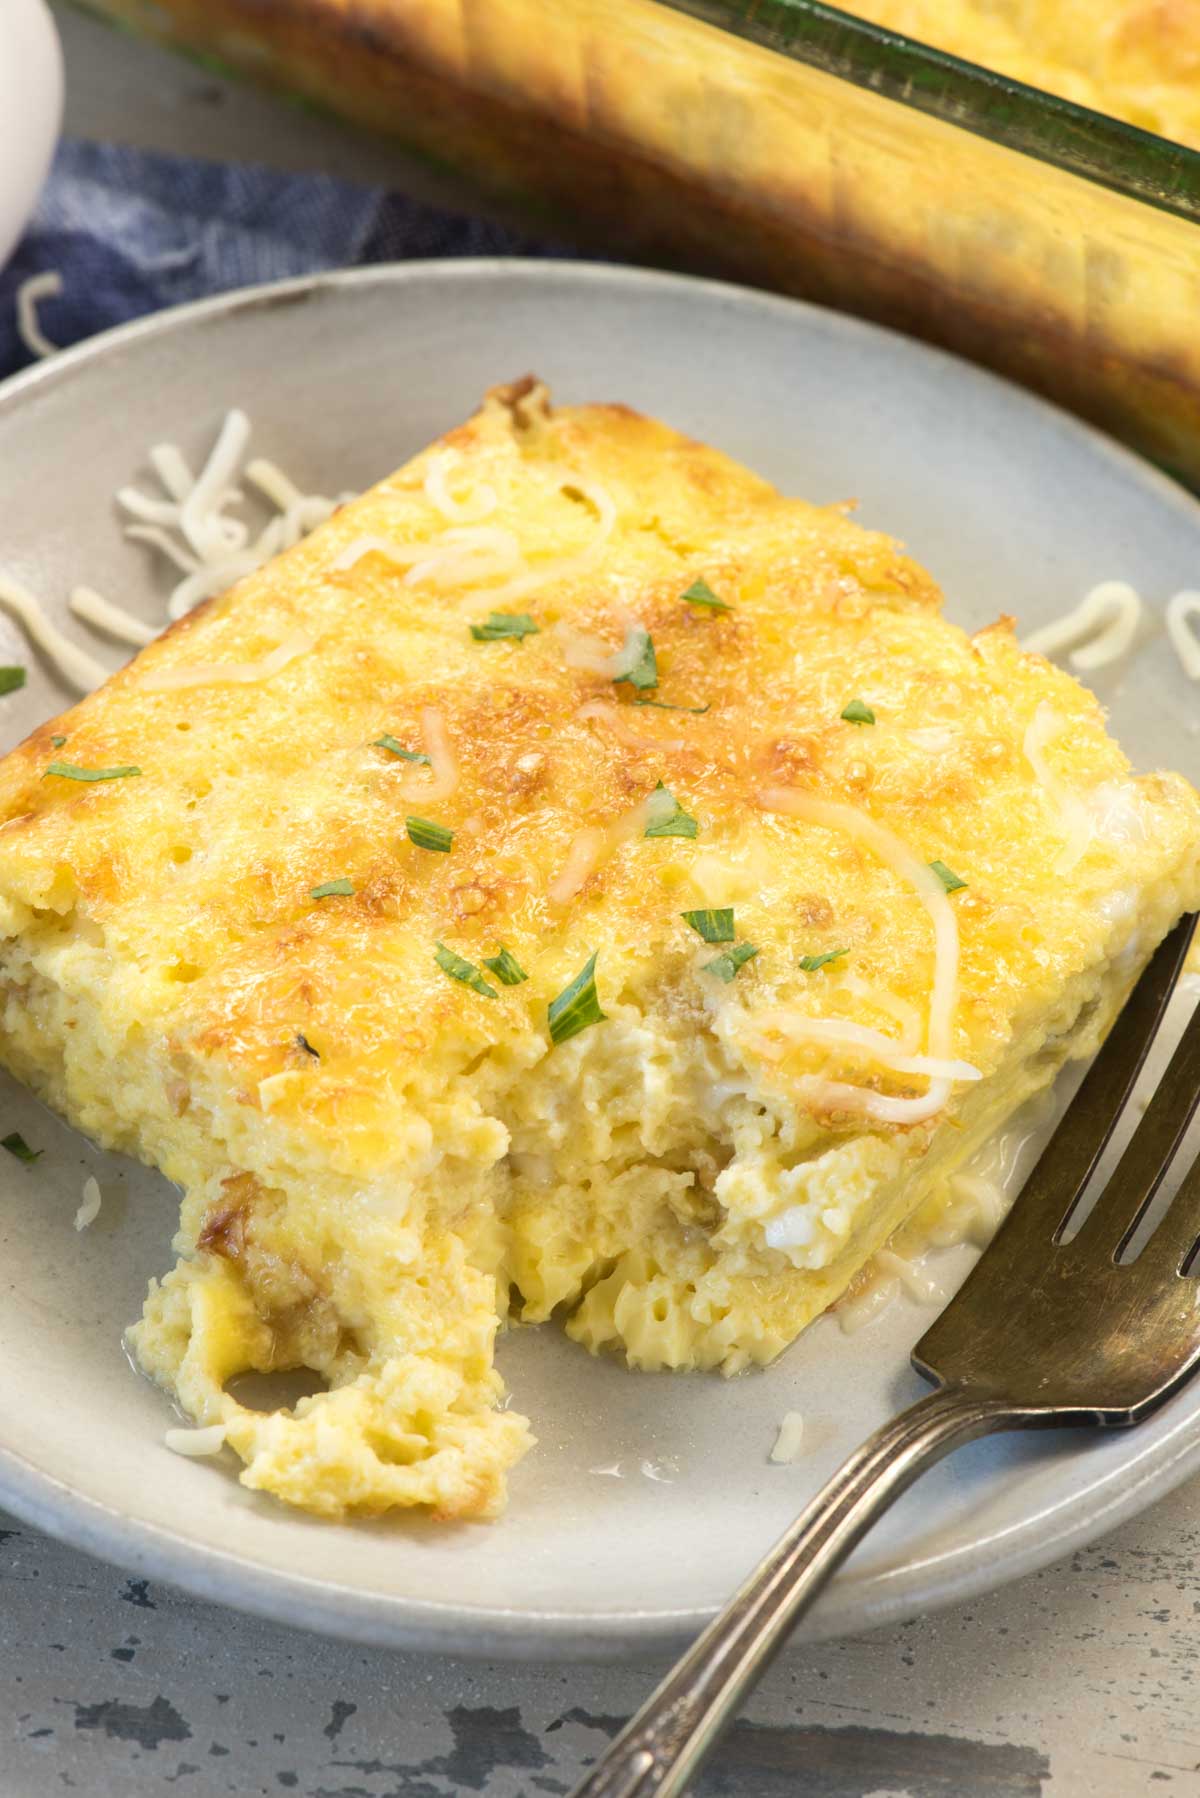 Green Chile Egg Breakfast Casserole - Crazy for Crust